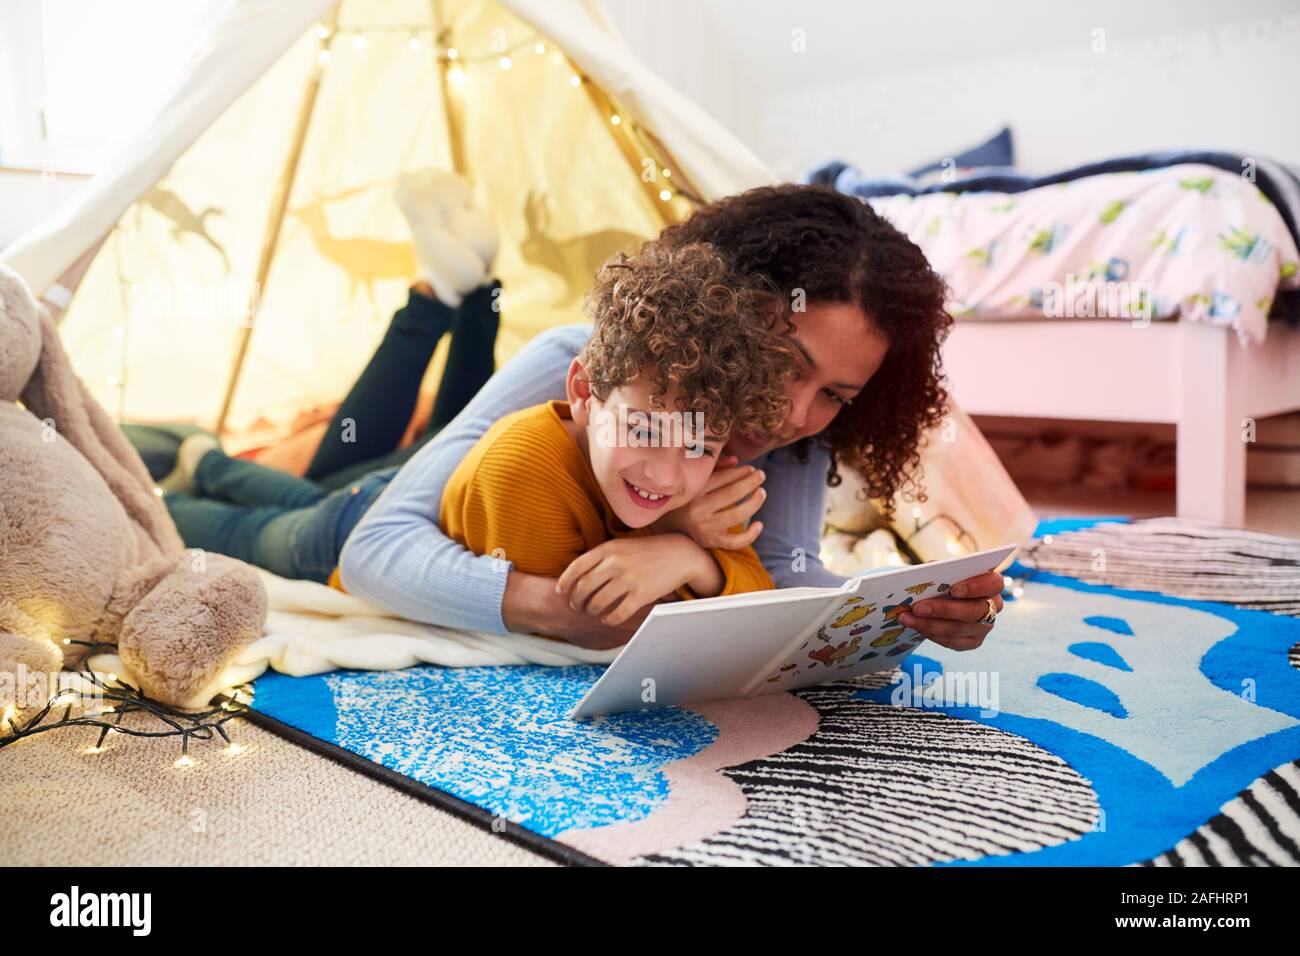 Single Mother Reading With Son In Den In Bedroom At Home Stock Photo